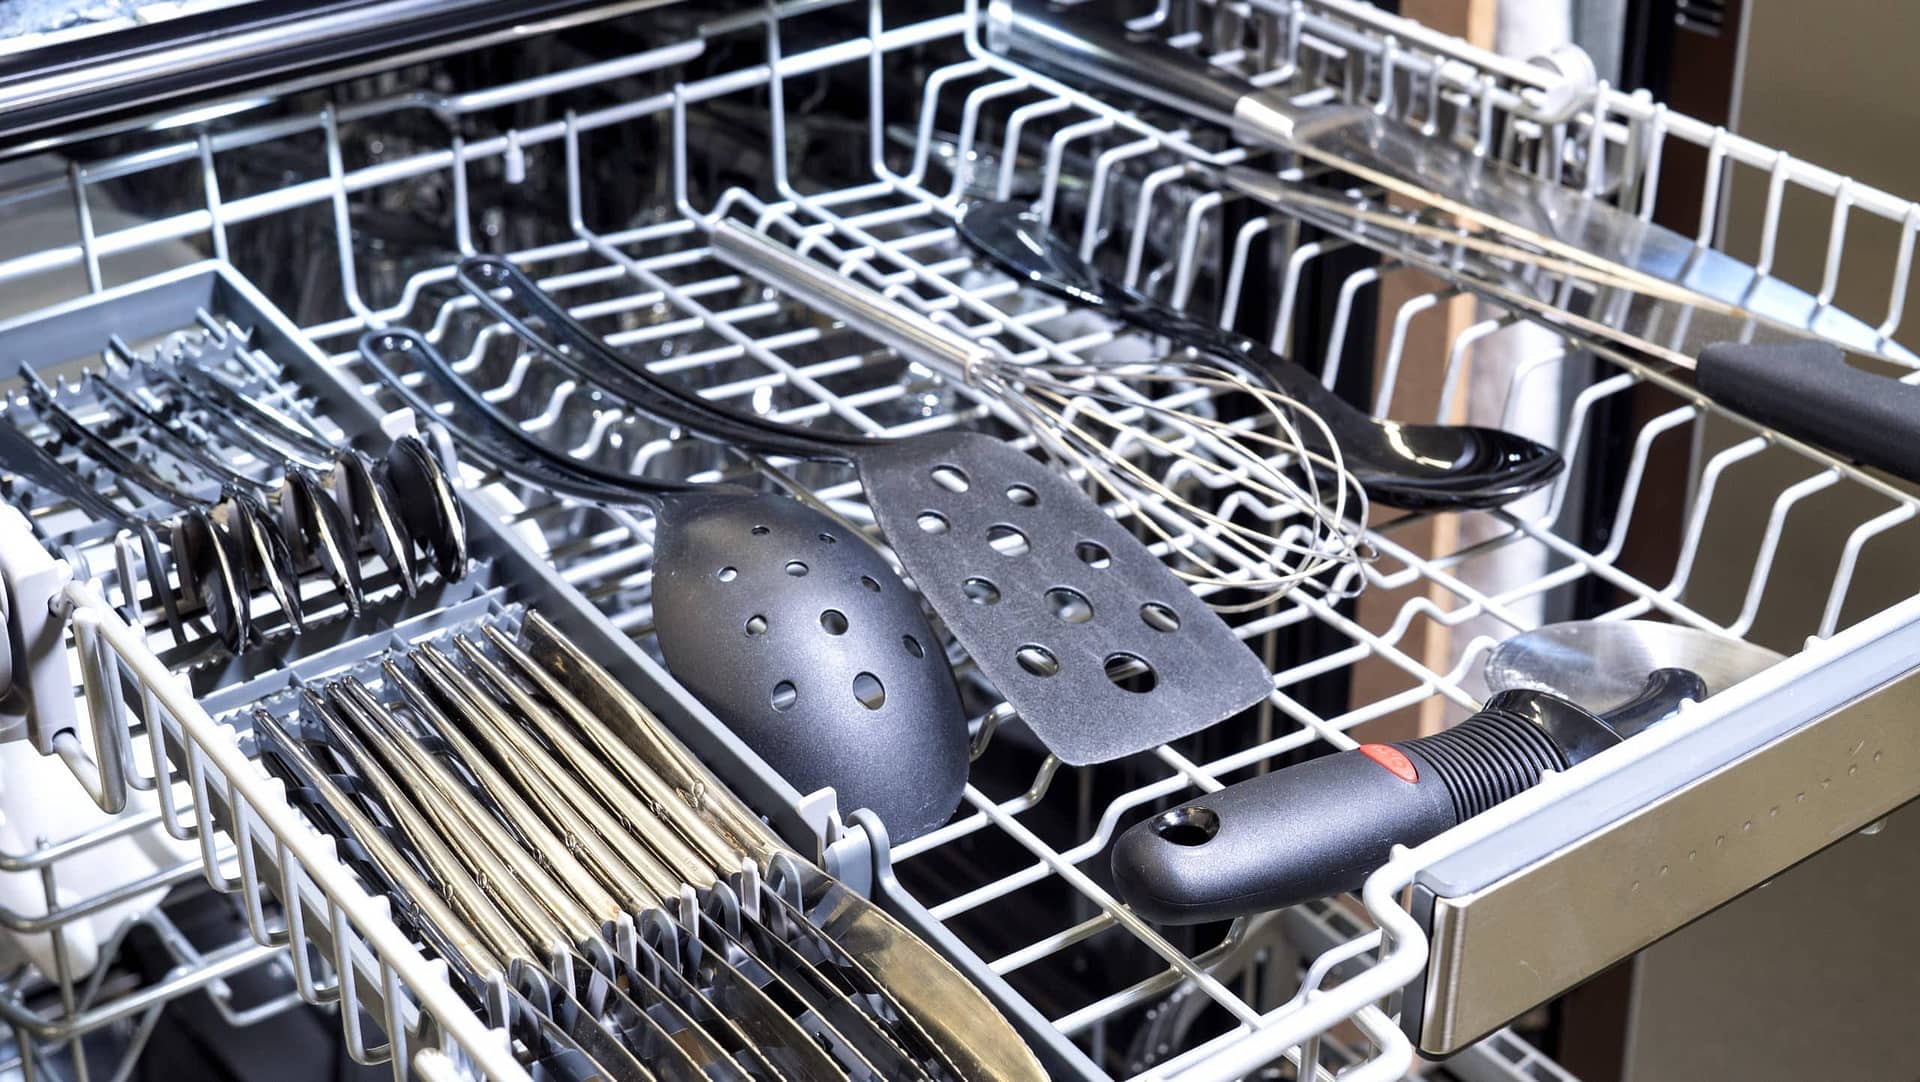 Dishwasher Top Rack Not Cleaning: 8 Easy Ways To Fix It Now